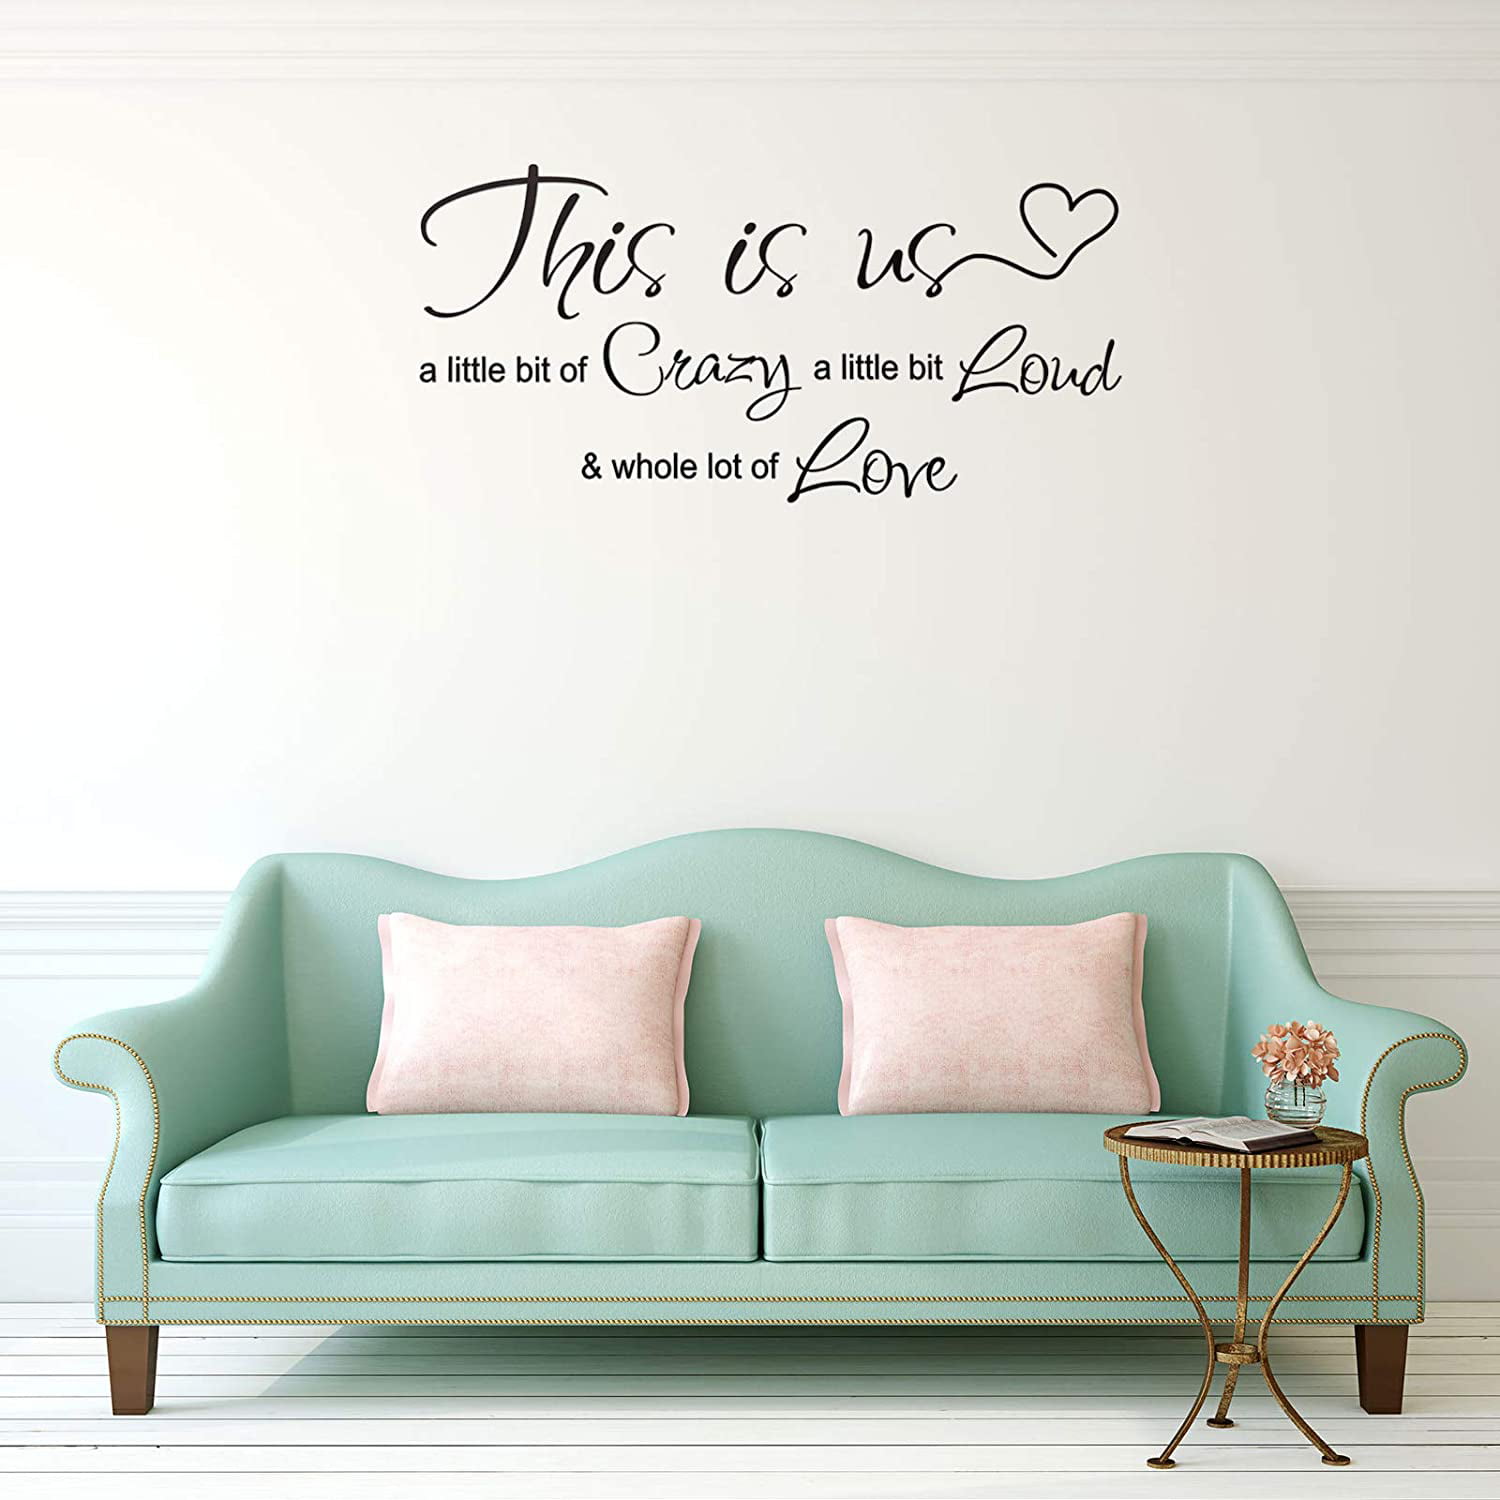 This is Us Crazy Loud Love Wall Sticker Inspirational Family Quote Sticker Art Lettering Saying Home Decoration for Bedroom Living Room Office 